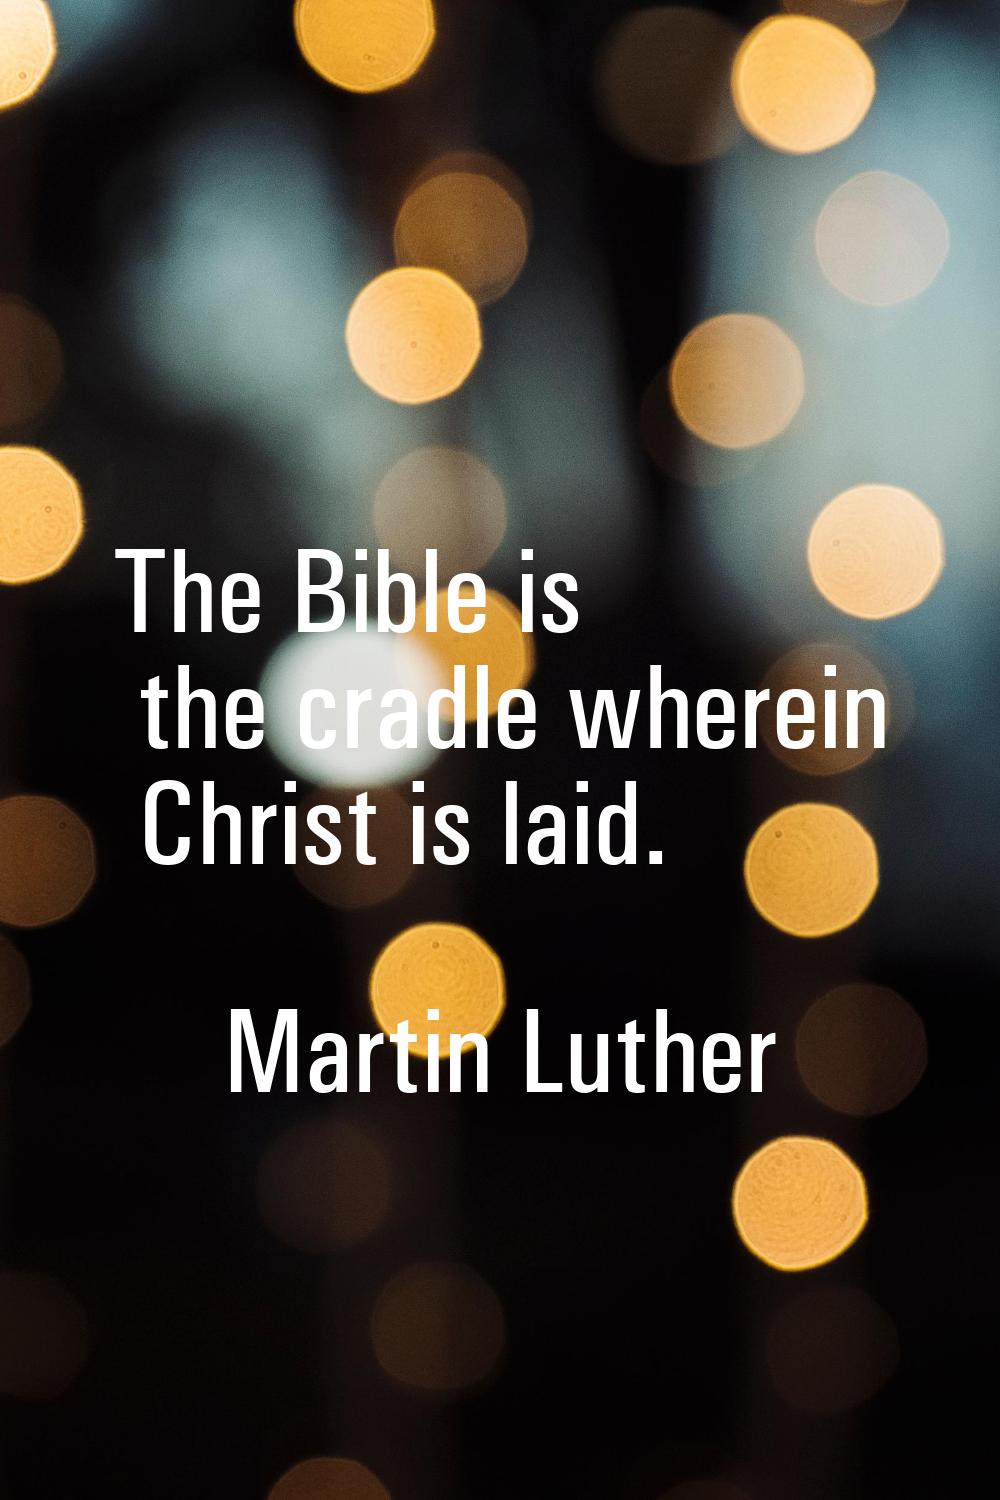 The Bible is the cradle wherein Christ is laid.